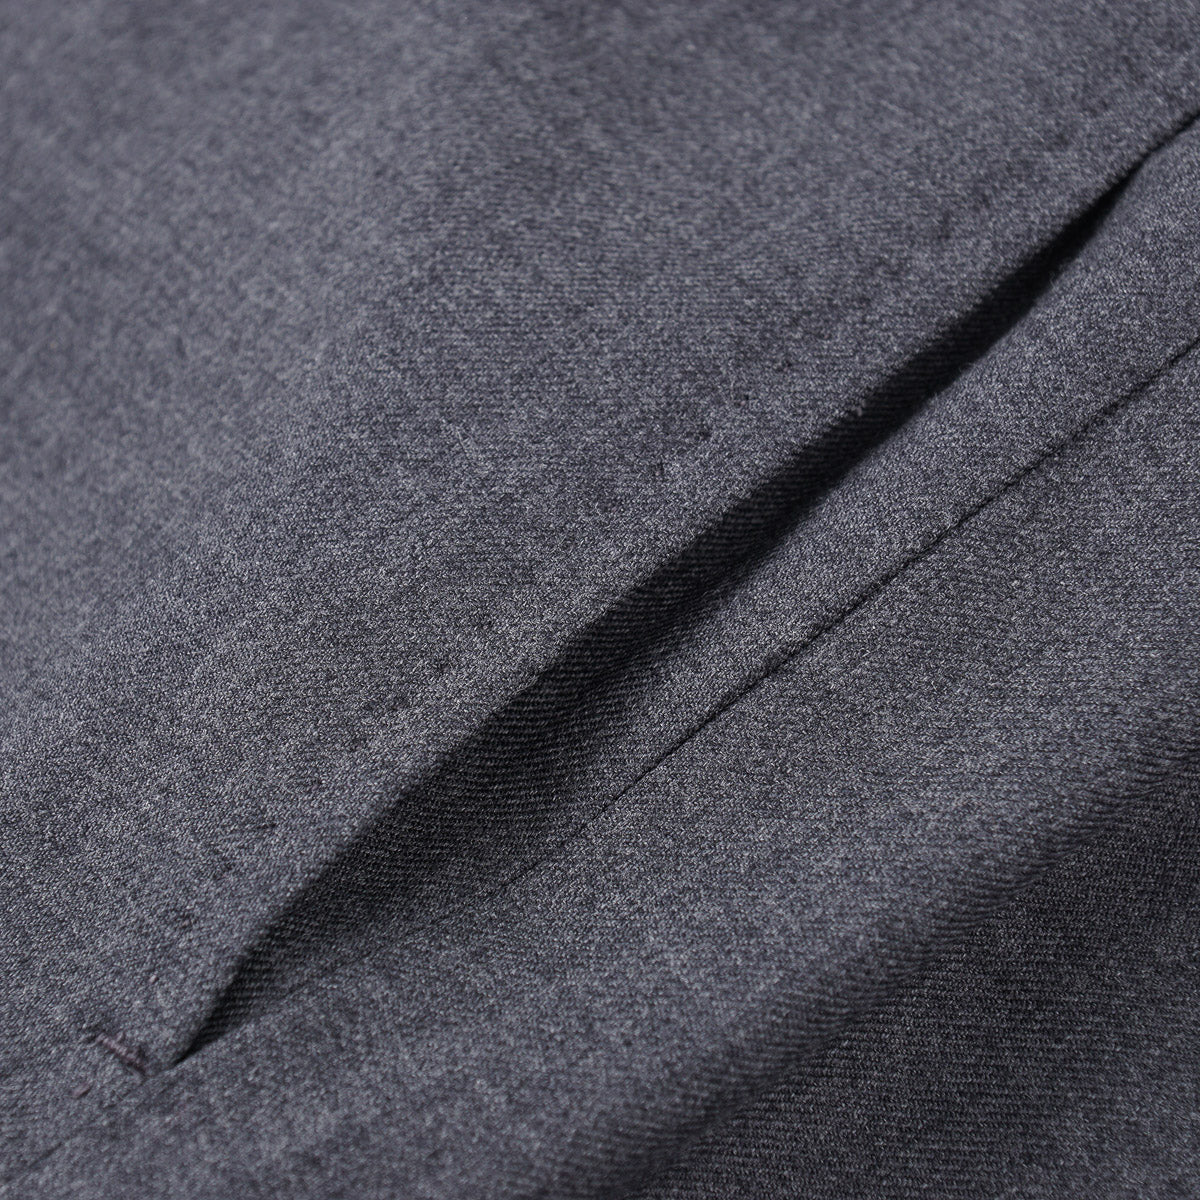 Oxxford 'Archer' Gray 140s Wool Suit - Top Shelf Apparel